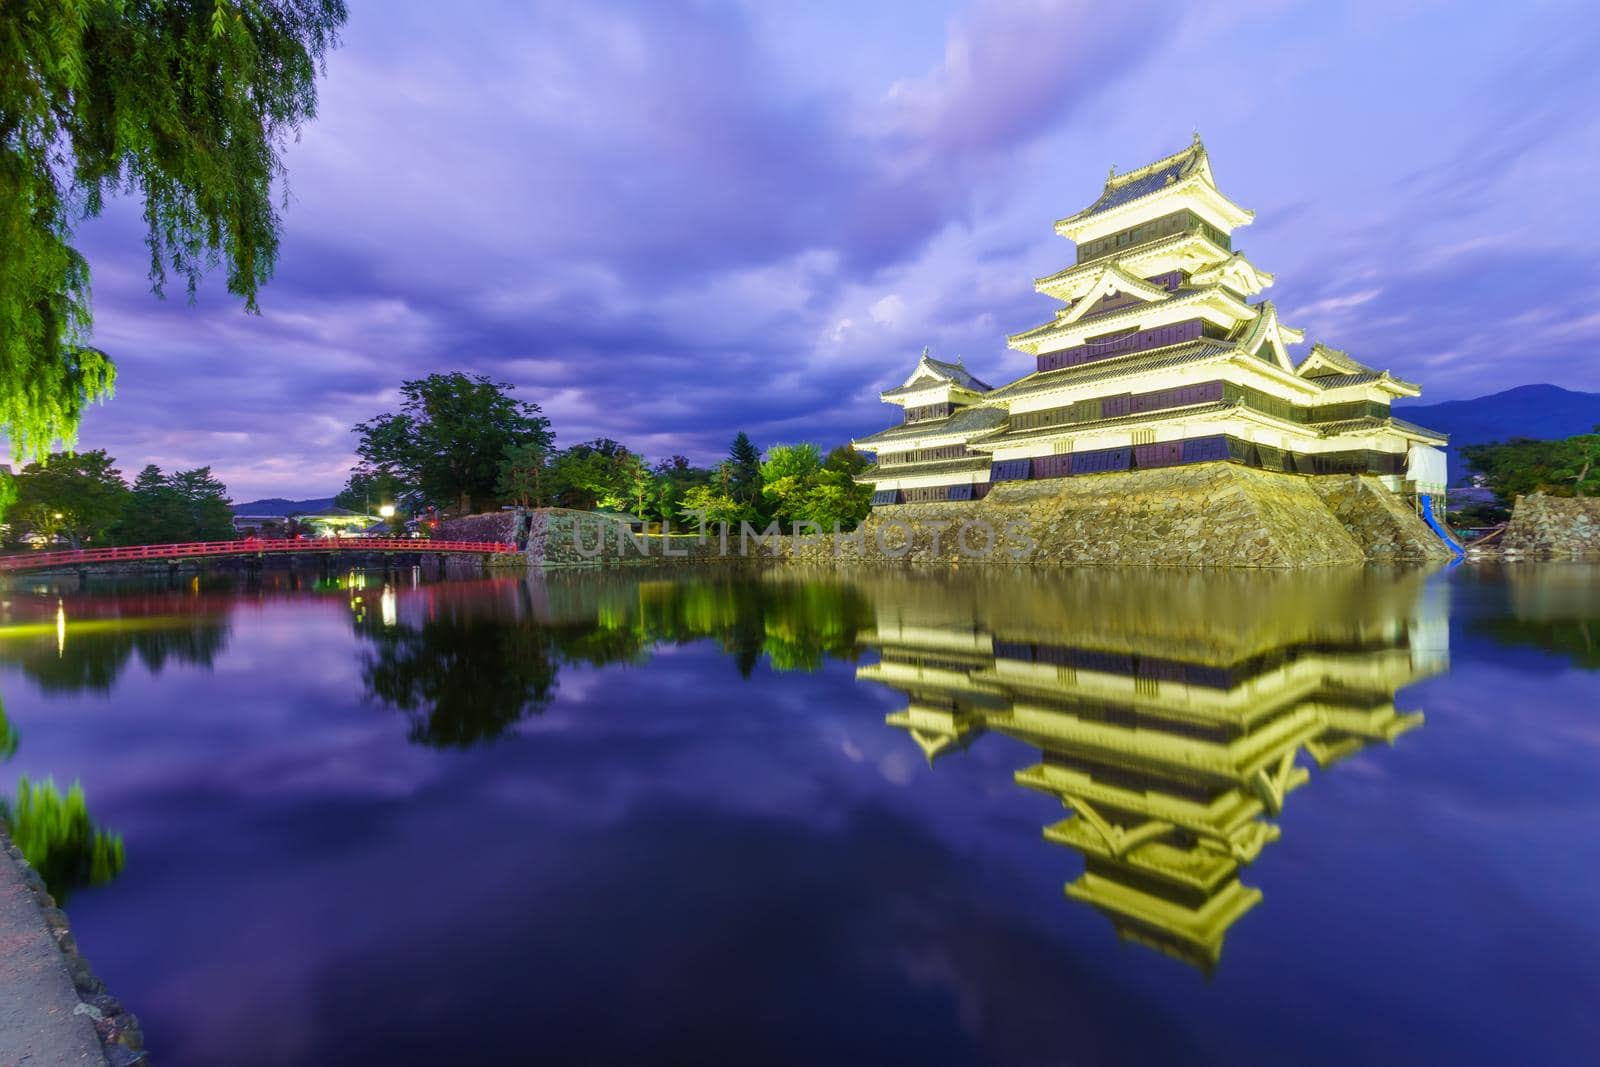 Night view of the Matsumoto Castle (or Crow Castle) and bridge, in Matsumoto, Japan